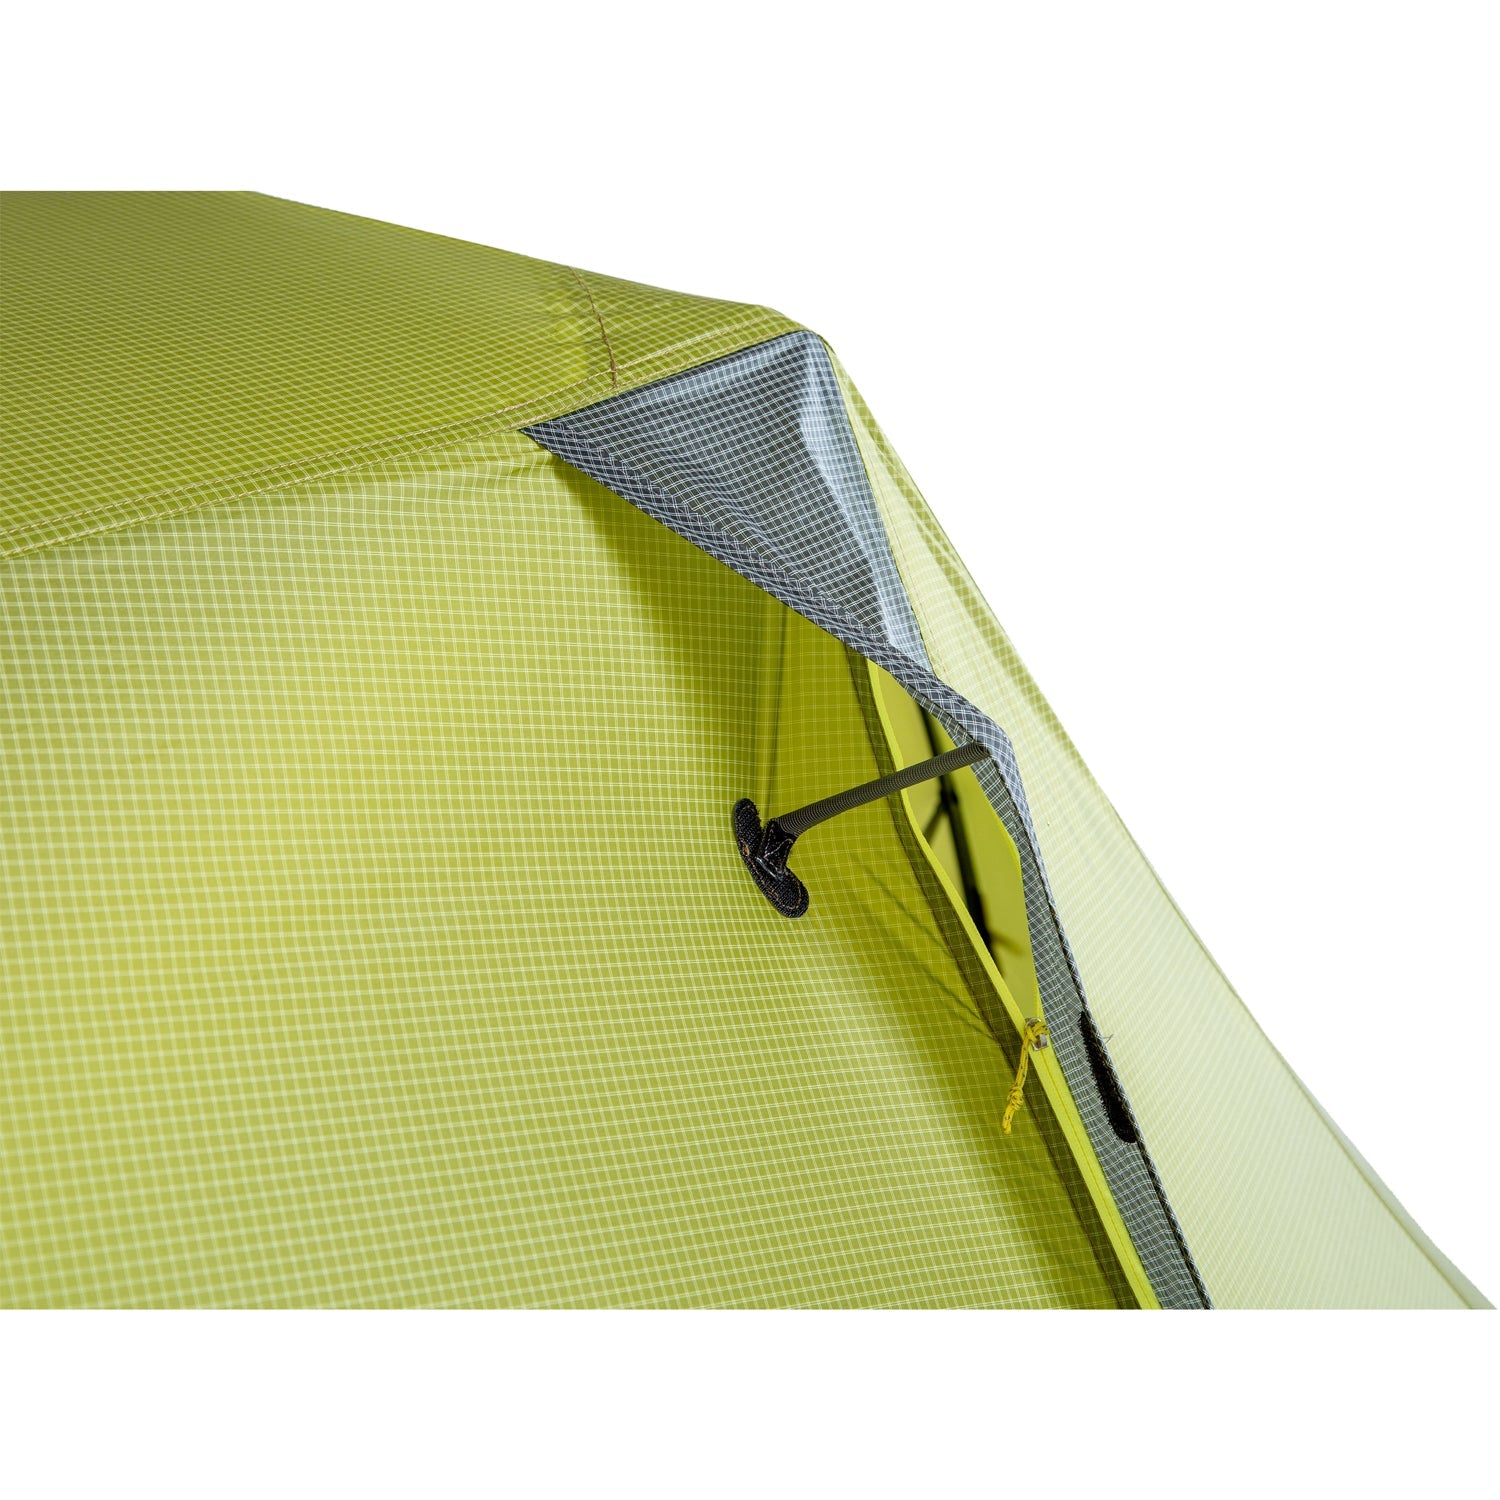 Nemo Dragonfly OSMO 3 Person Backpacking Tent